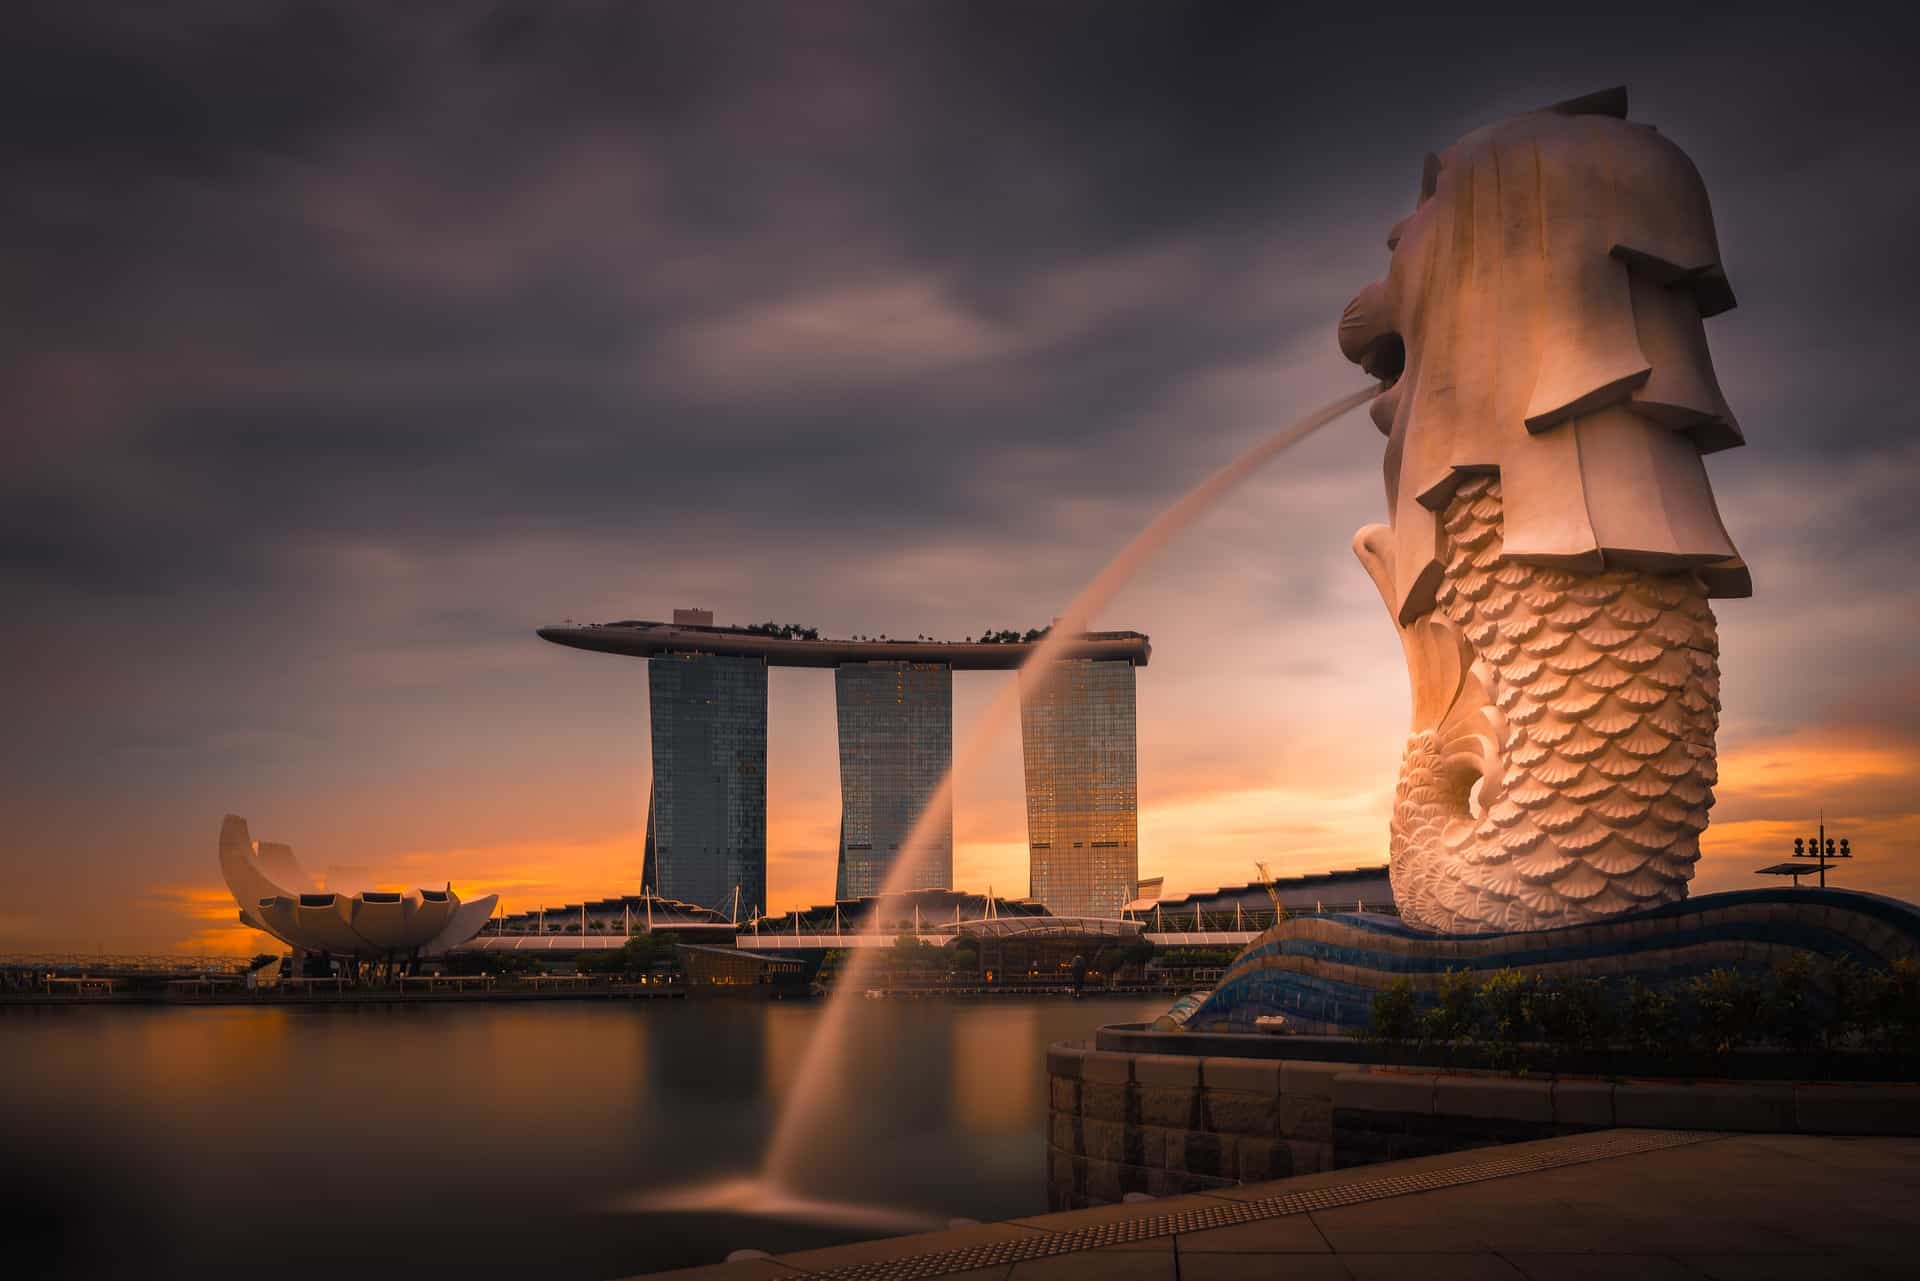 Merlion Singapore with Marina Bay Sands in Background